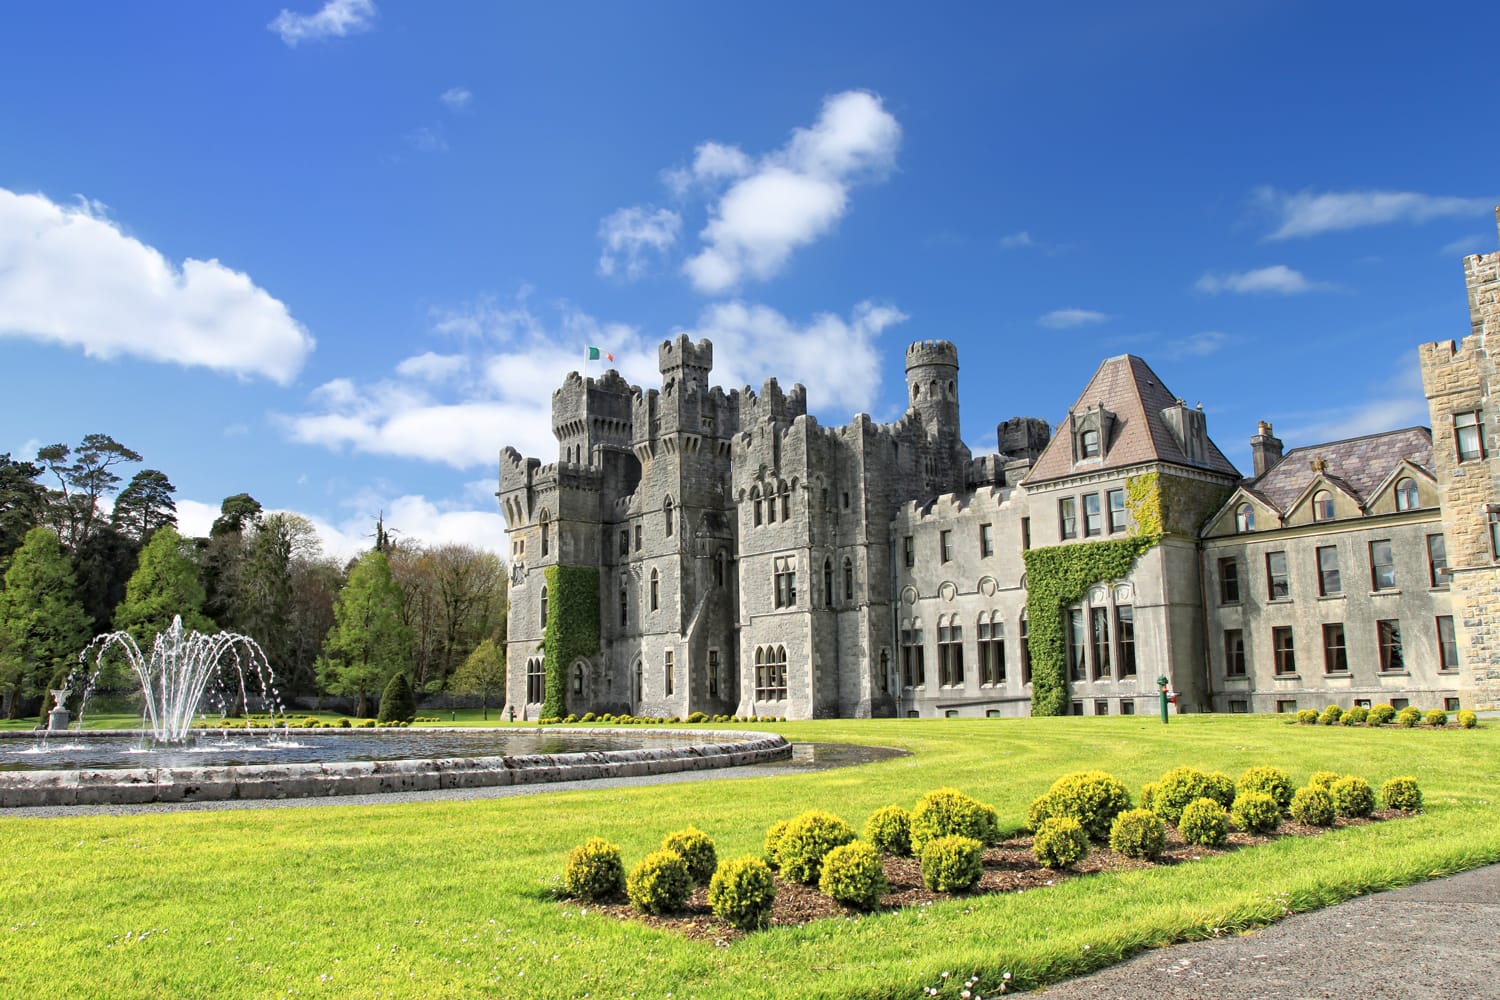 Medieval Ashford castle and gardens in Ireland